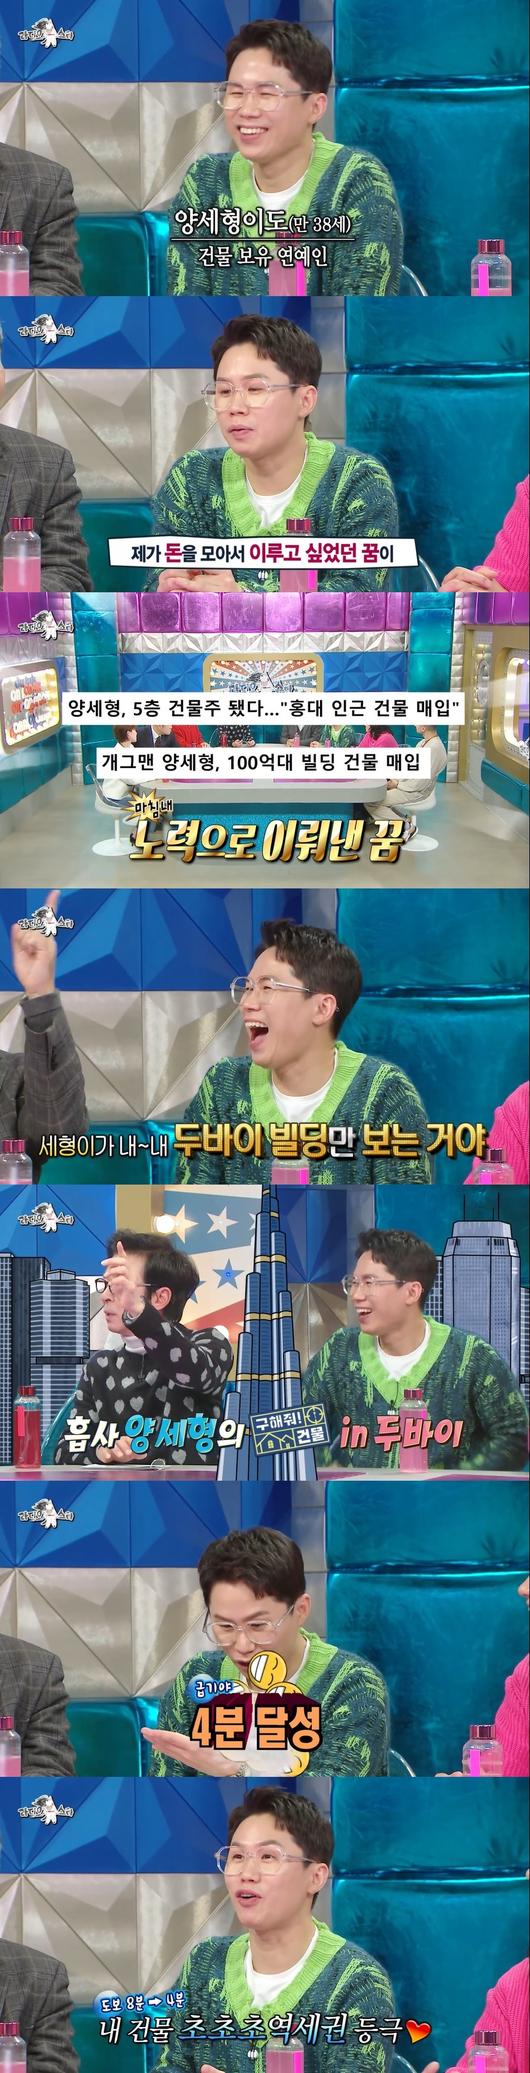 Yang Se-hyung reveals the secret to becoming a building owner worth KRW 10.9 billion!